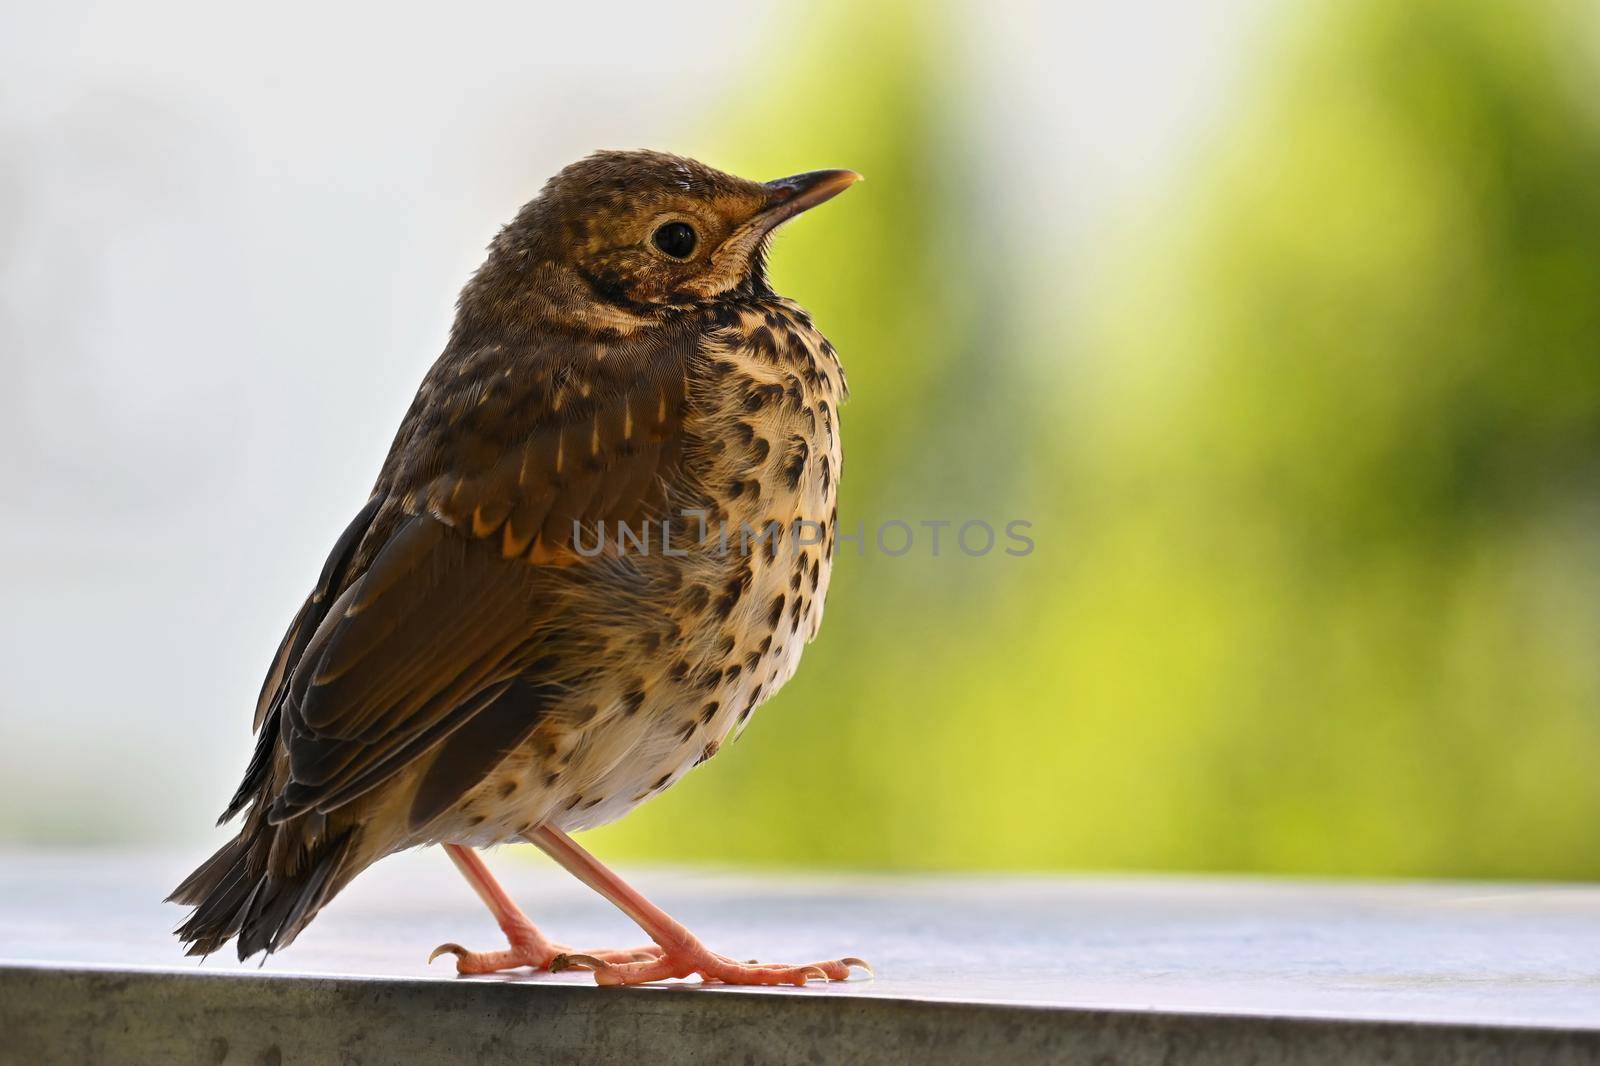 Beautiful detail and baby bird (Turdus Linnaeus)
Animal in nature - colorful background.